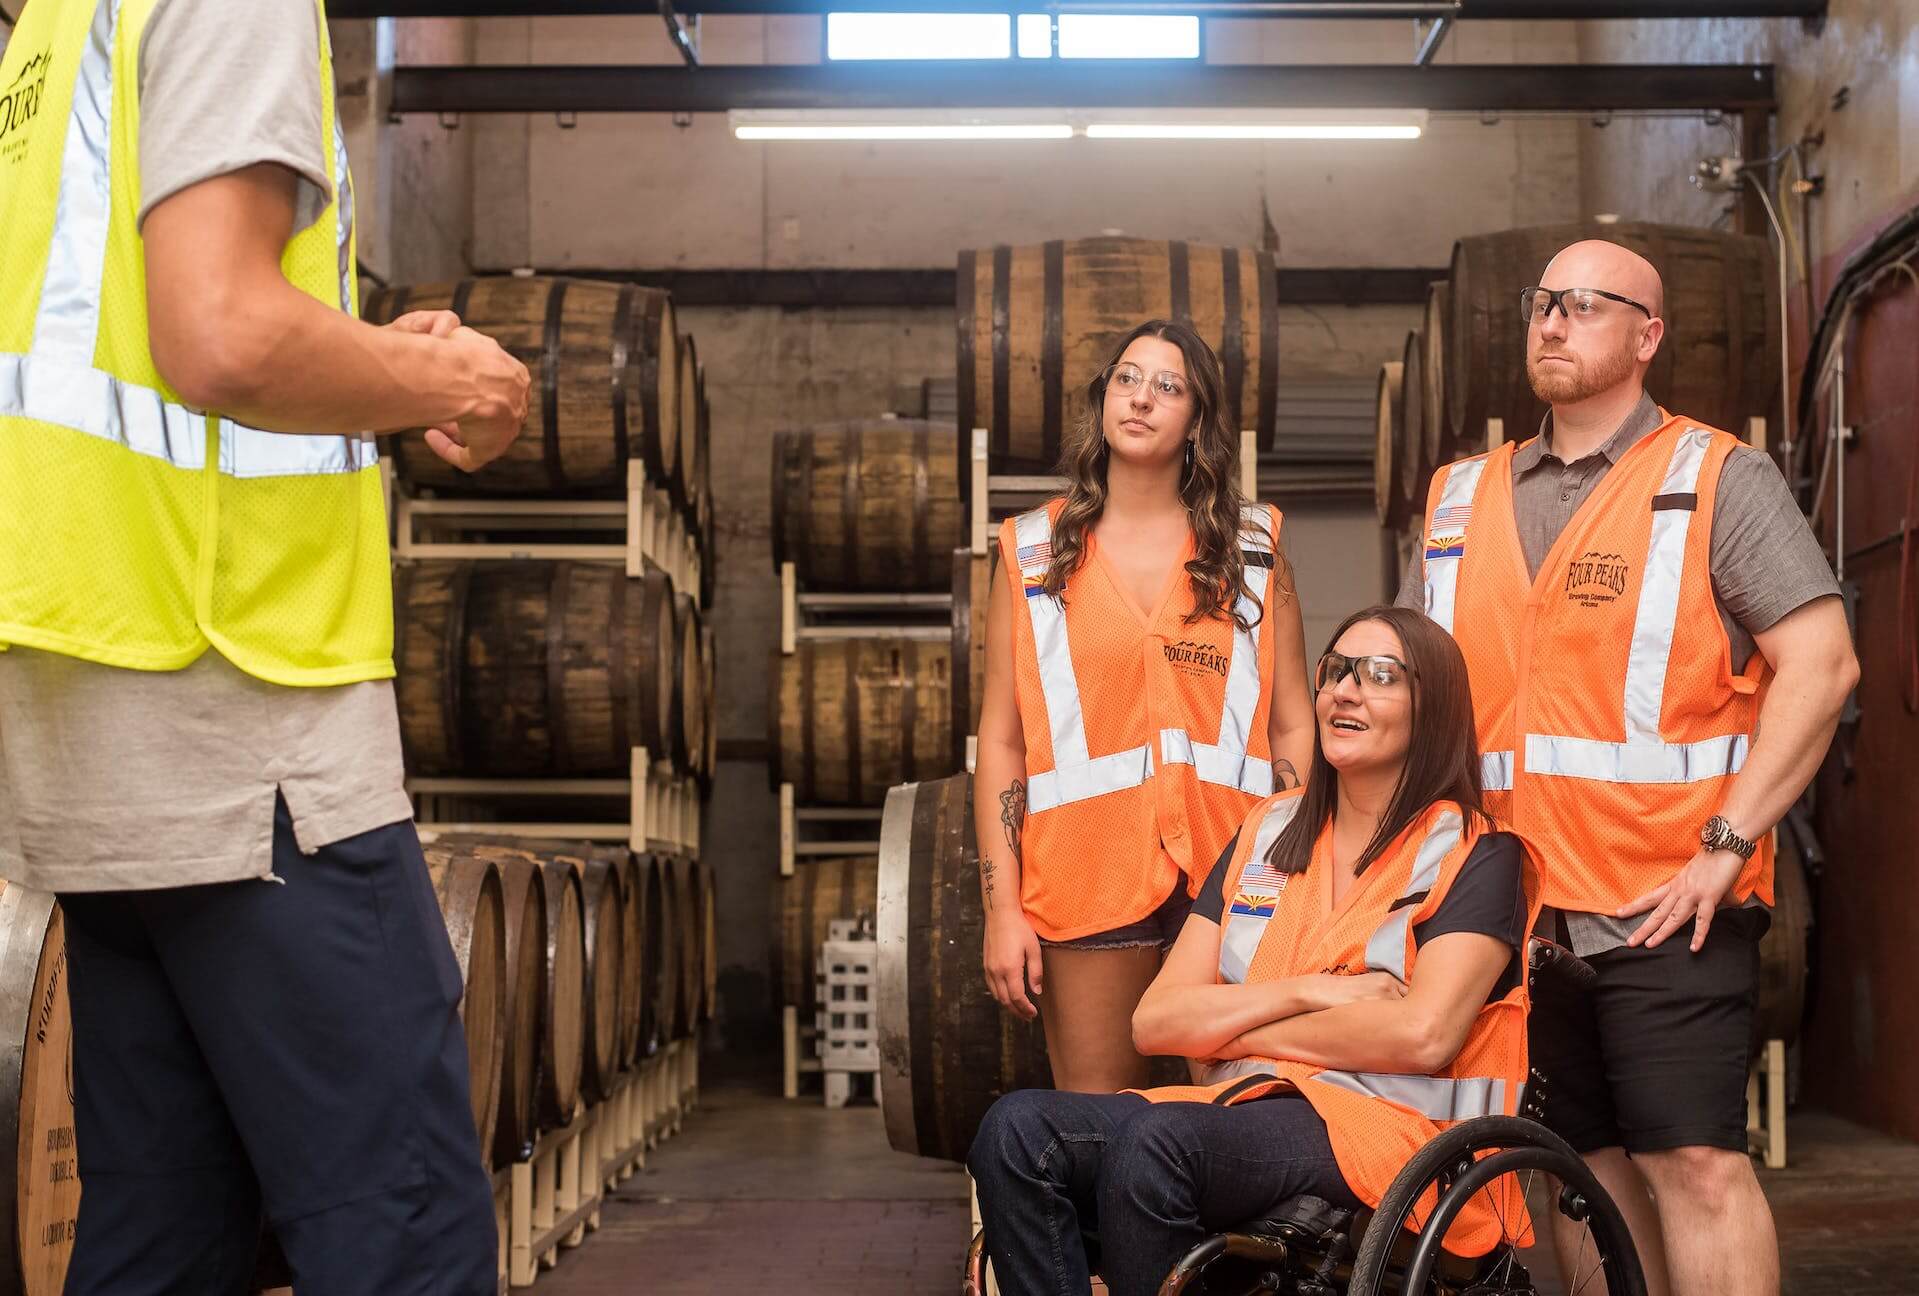 Manager in yellow vest in foreground gives direction to 3 employees in orange vests in the background. One of the employees is in a wheelchair